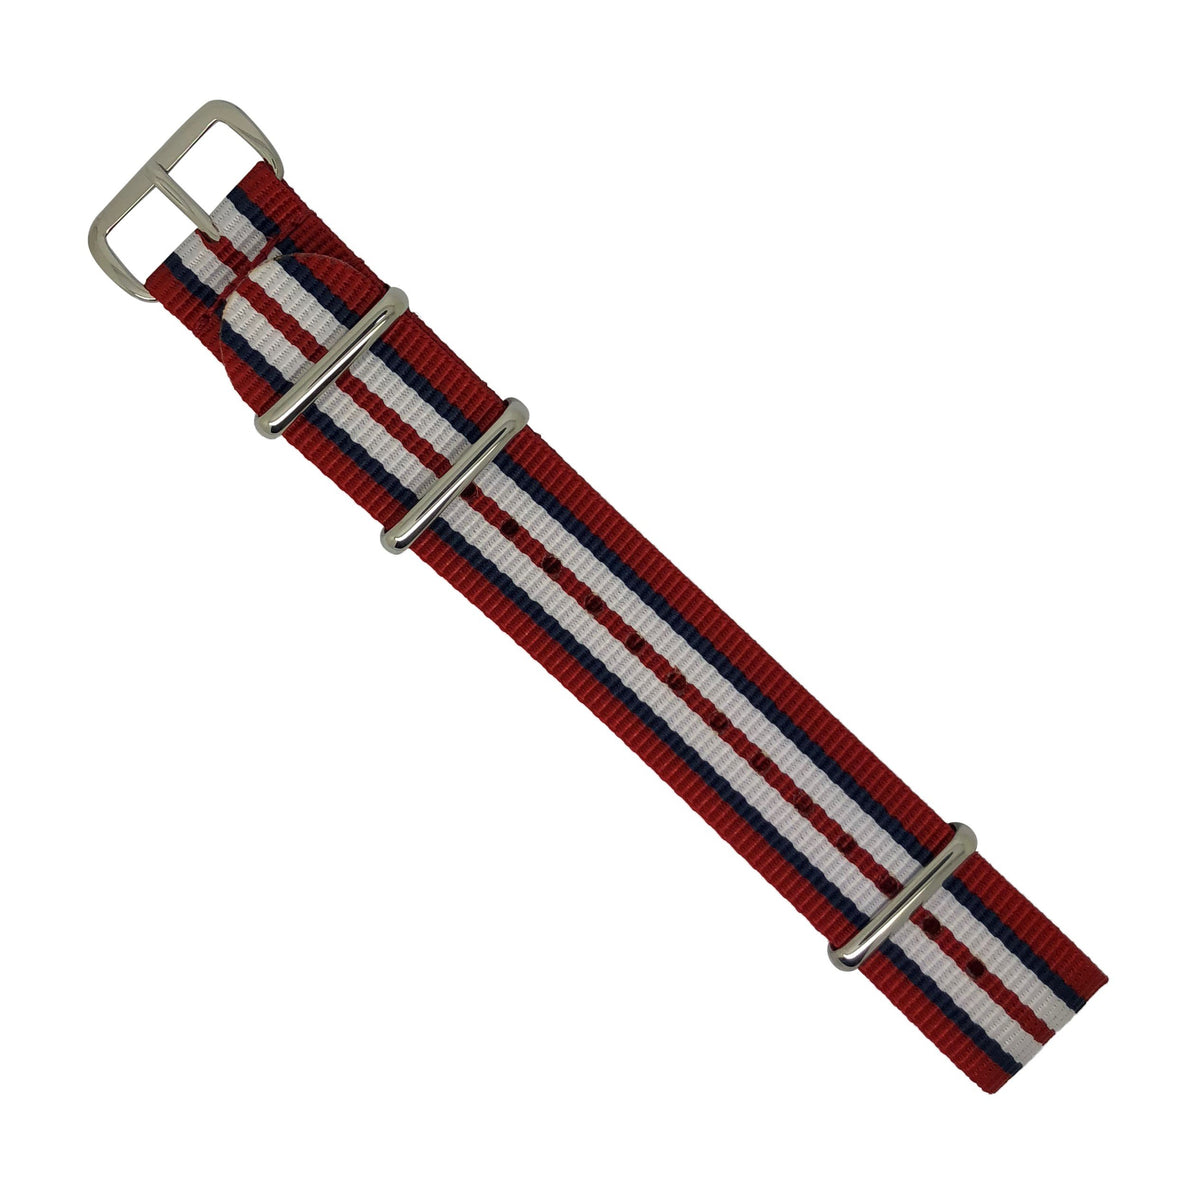 Premium Nato Strap in Red Navy White with Polished Silver Buckle (20mm) - Nomad Watch Works Malaysia